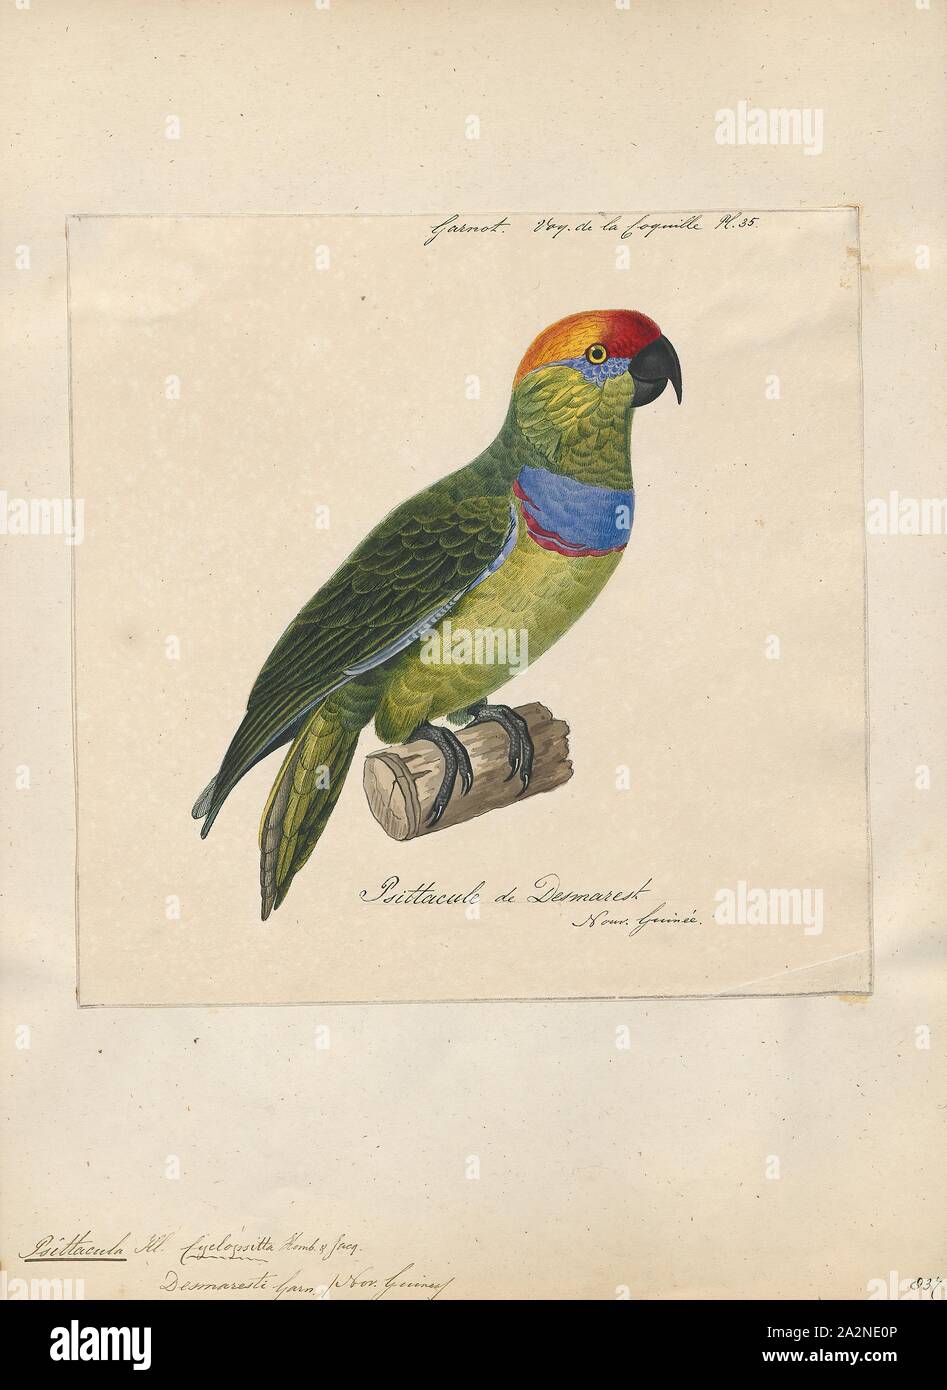 Psittacula desmaresti, Print, Members of the parrot genus Psittacula or Afro-Asian ring-necked parakeets as they are commonly known in aviculture originates found from Africa to South-East Asia. It is a widespread group, with a clear concentration of species in south Asia, but also with representatives in Africa and the islands of the Indian Ocean. This is the only genus of Parrot which has the majority of its species in continental Asia. Of all the extant species only Psittacula calthropae, Psittacula caniceps and Psittacula echo do not have a representative subspecies in any part of mainland Stock Photo